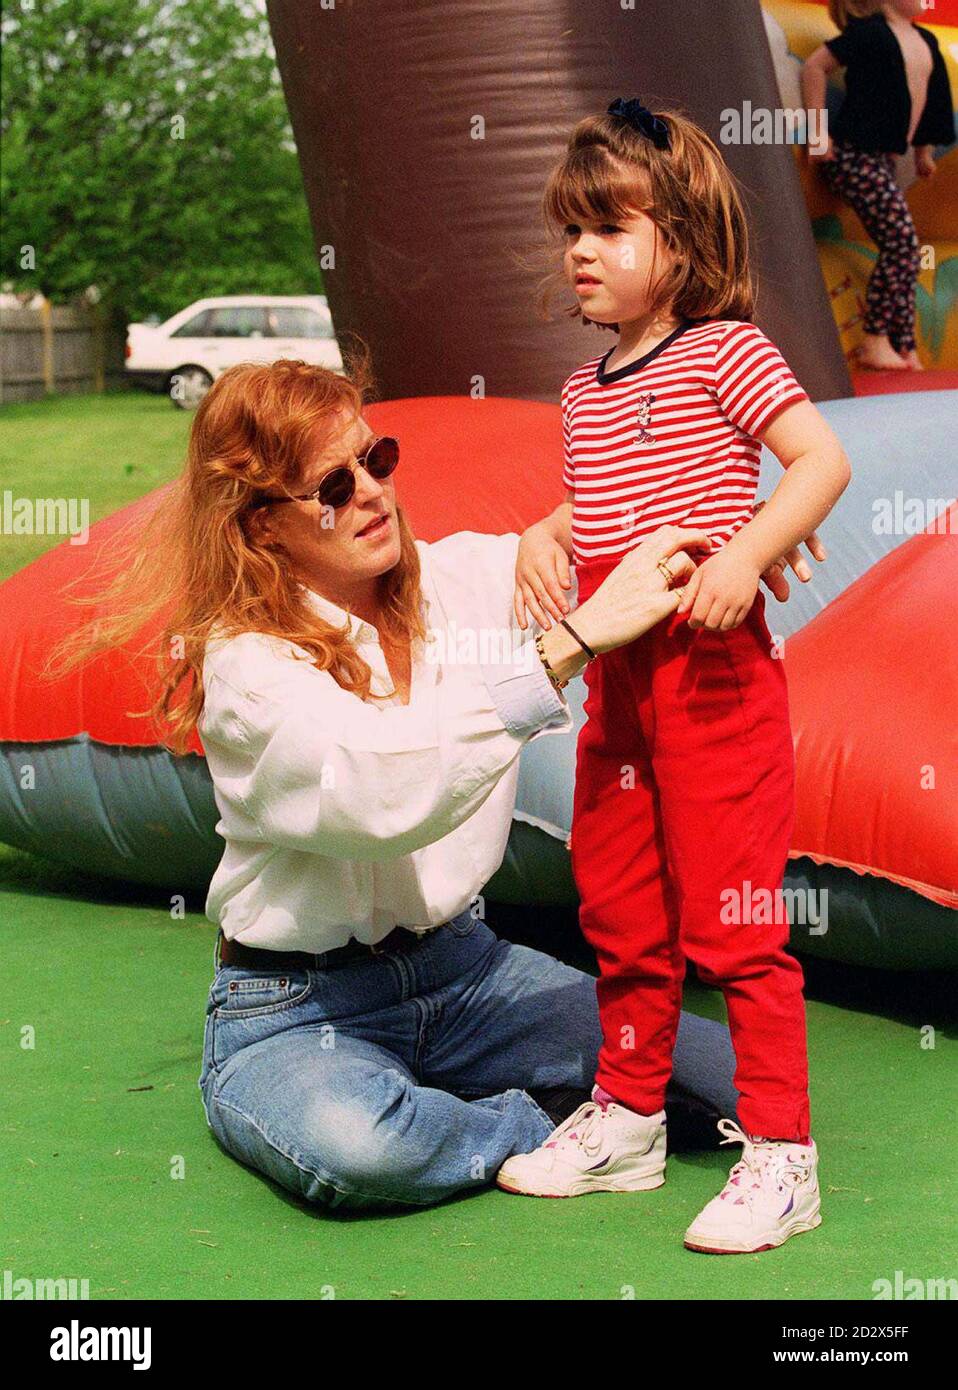 The Duchess of York attends to her daughter Princess Eugenie during a visit to Hickstead for the Enza Nations Cup, on the day her divorce from the Duke of York was declared absolute by a court in London.   * The Duchess, who will no longer be known as 'her Royal Highness', and the Duke issued a statement confirming that 'they remain the closest of friends (and) are dedicated parents, committed to raising their daughters together'. Stock Photo